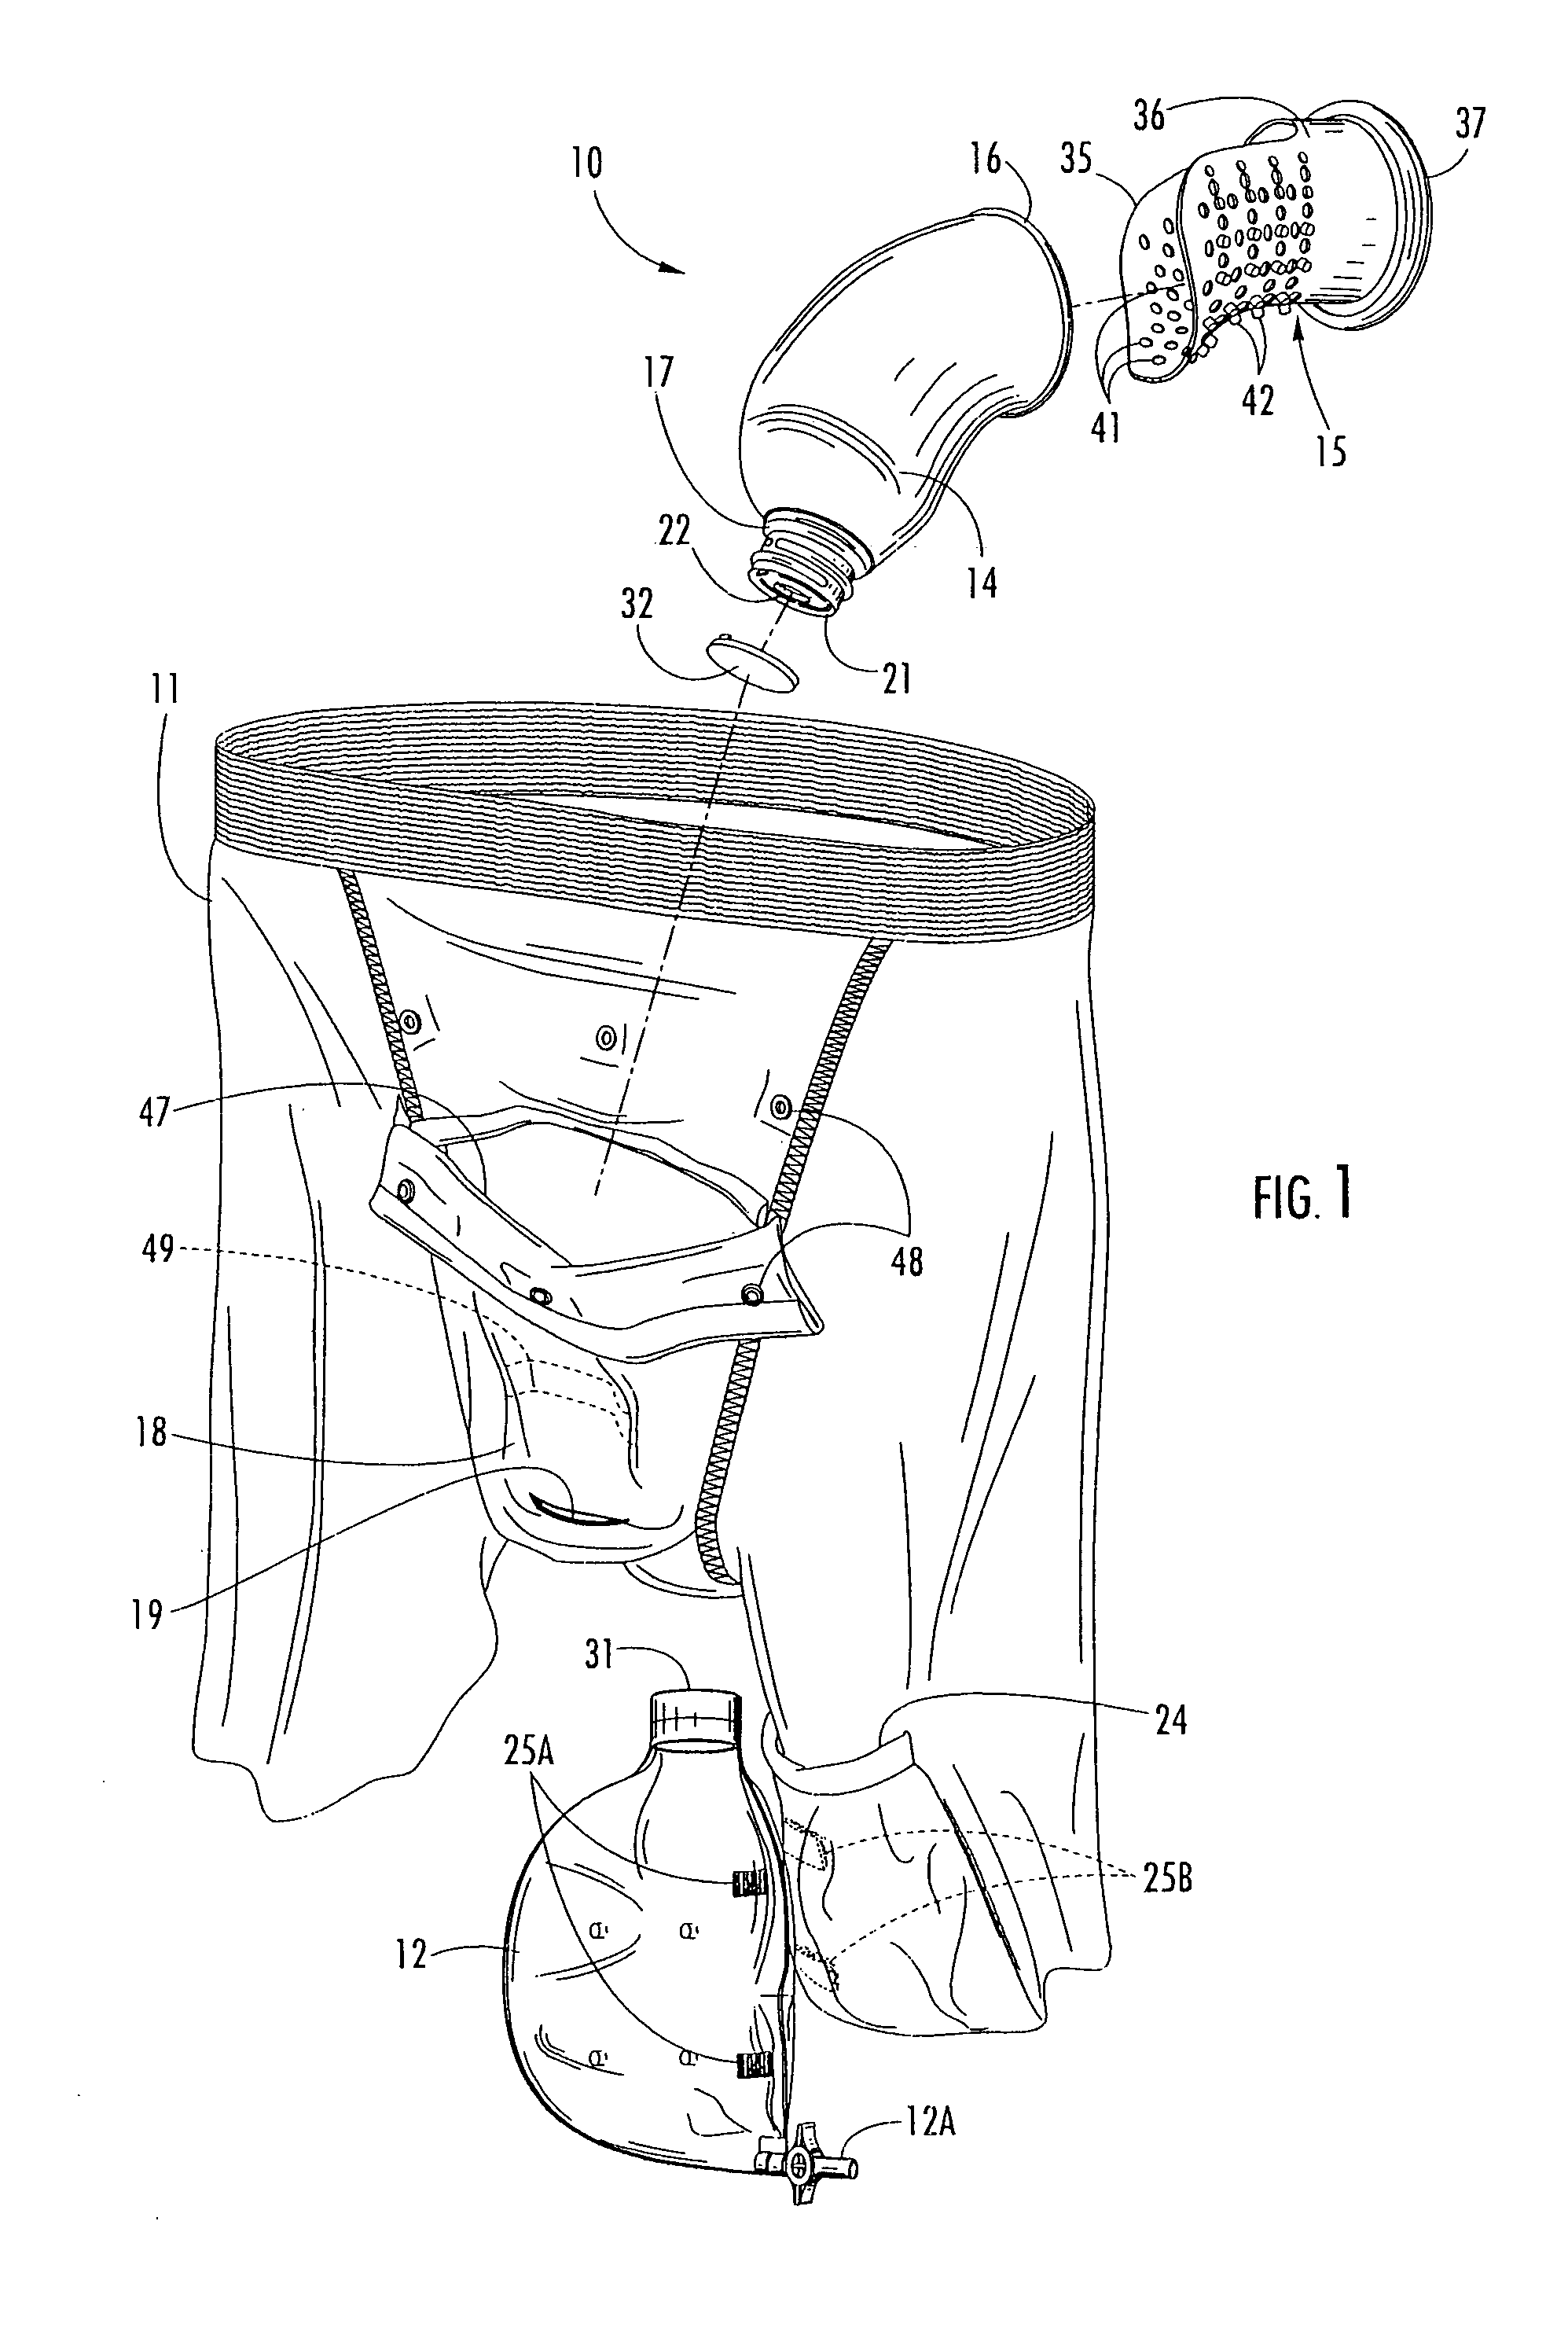 Receptacle for a male incontinence device